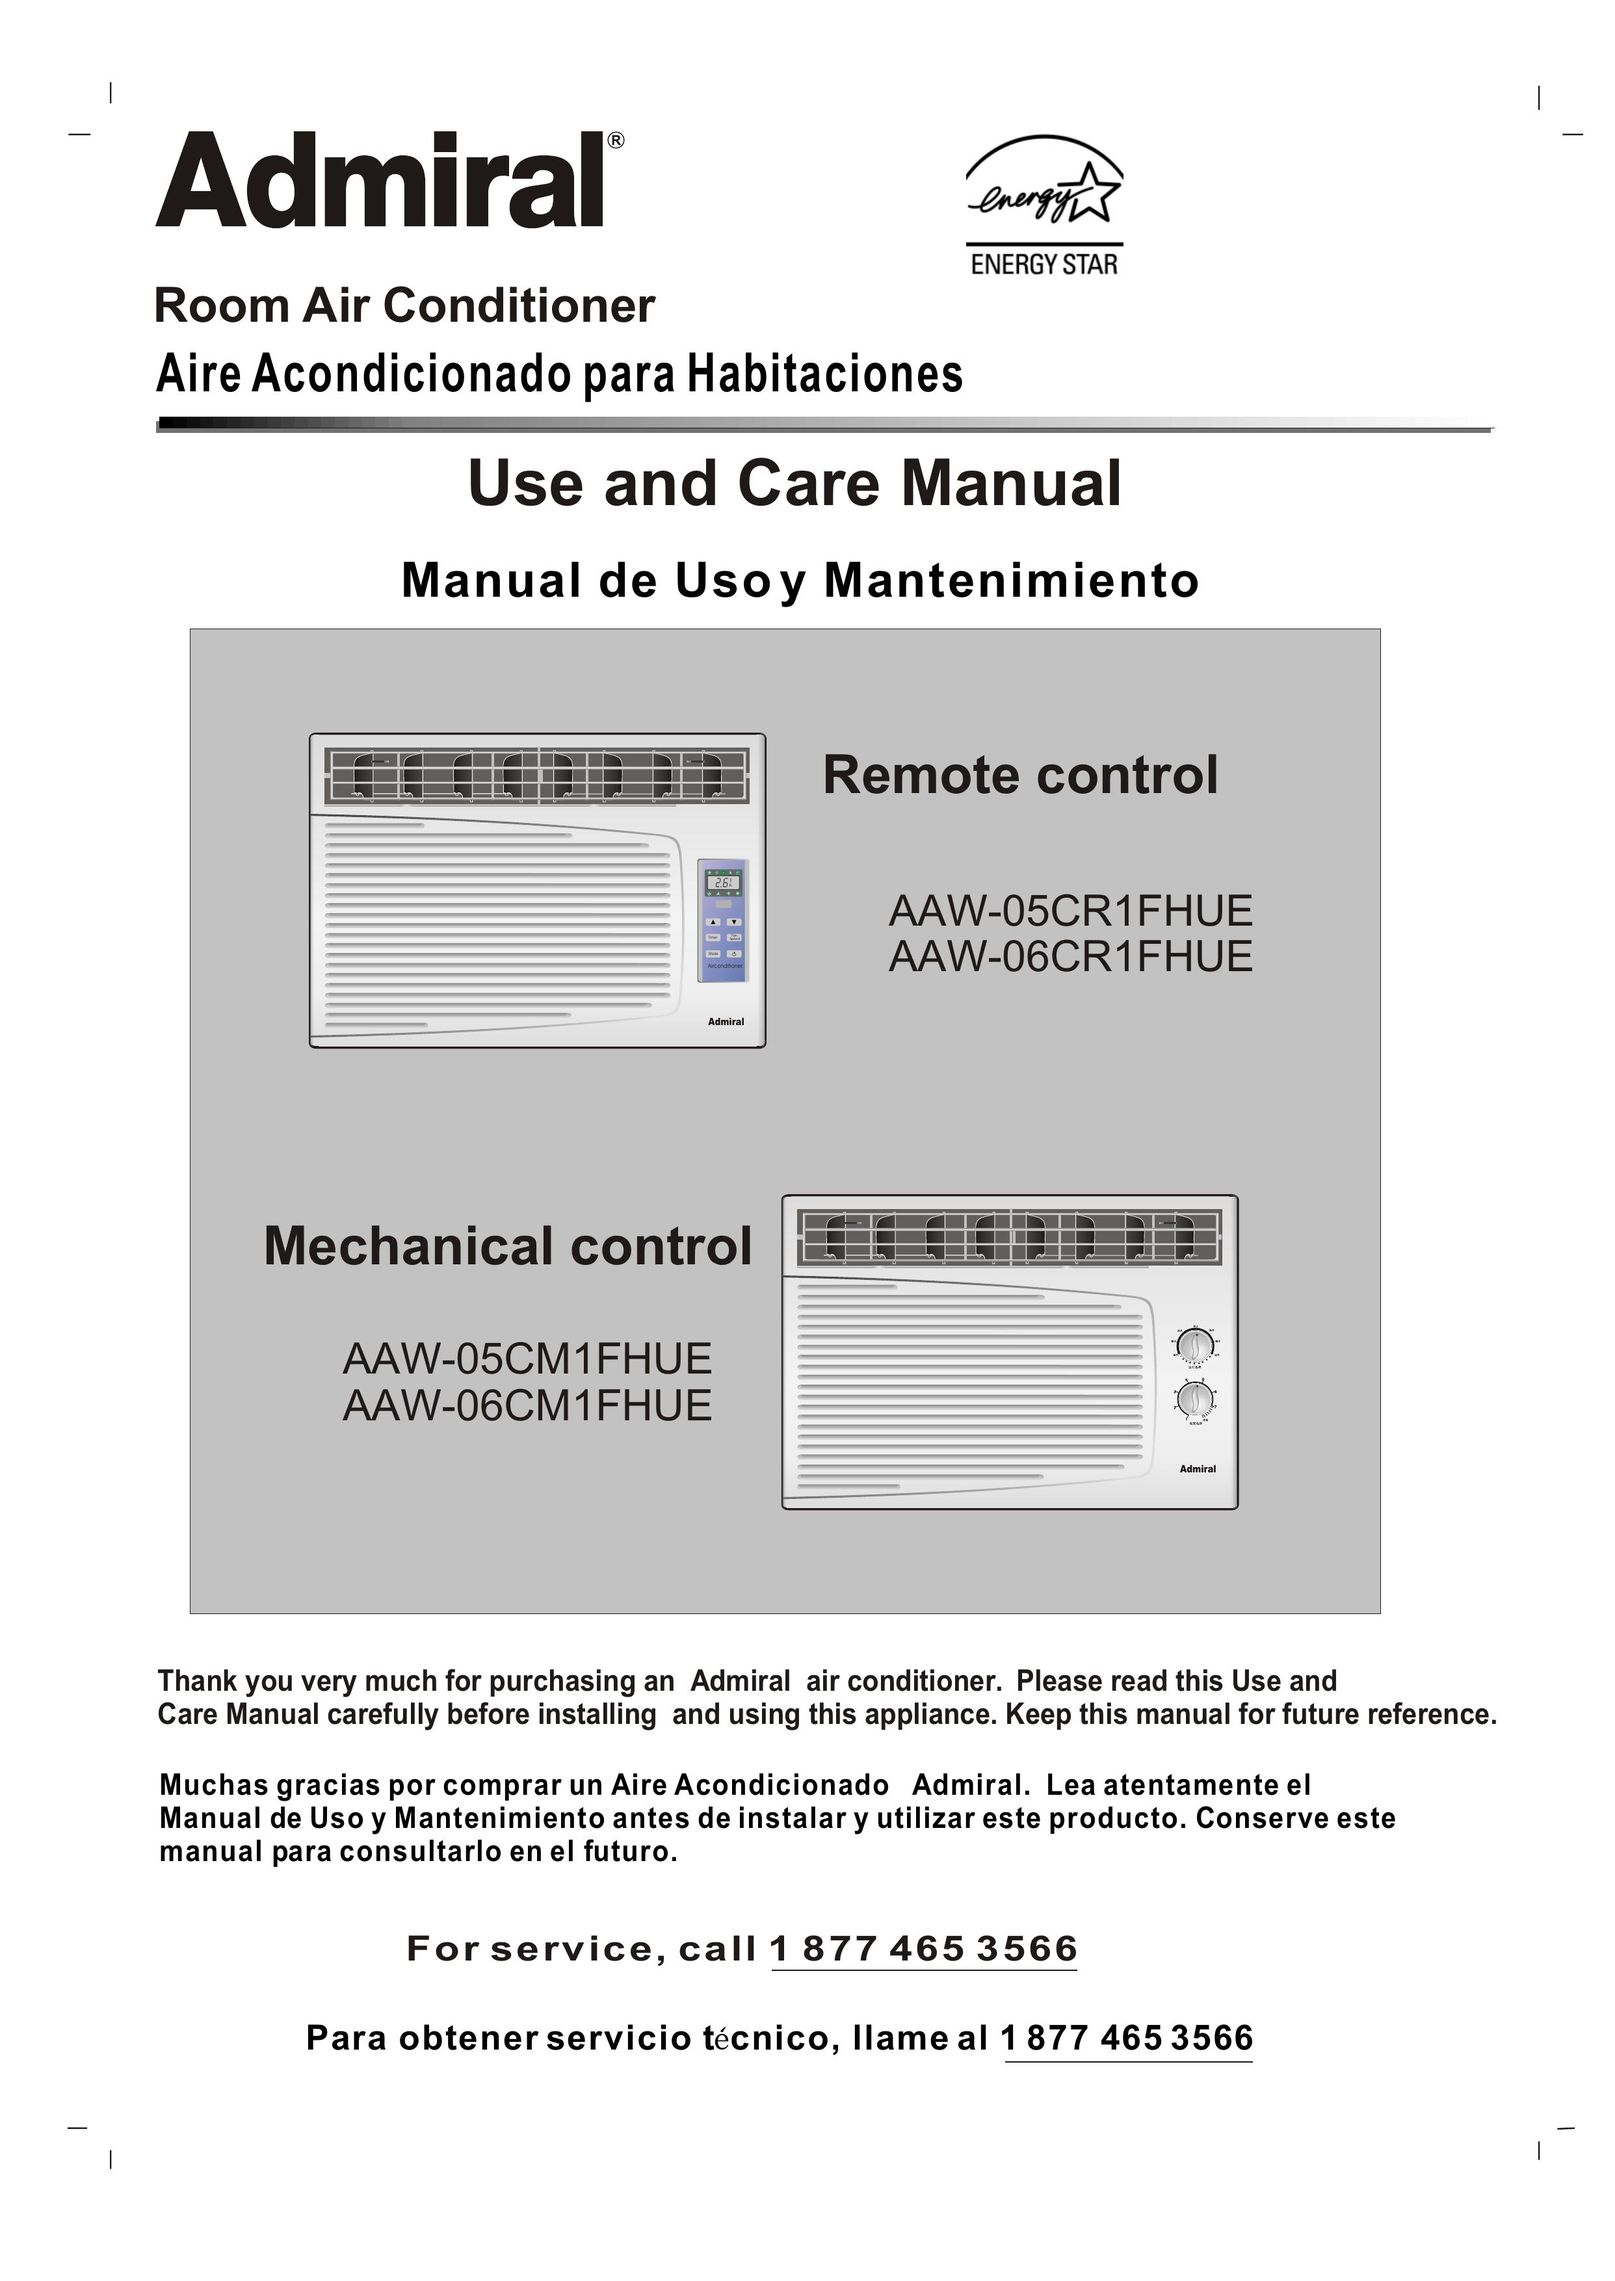 Admiral AAW-05CR1FHUE Air Conditioner User Manual